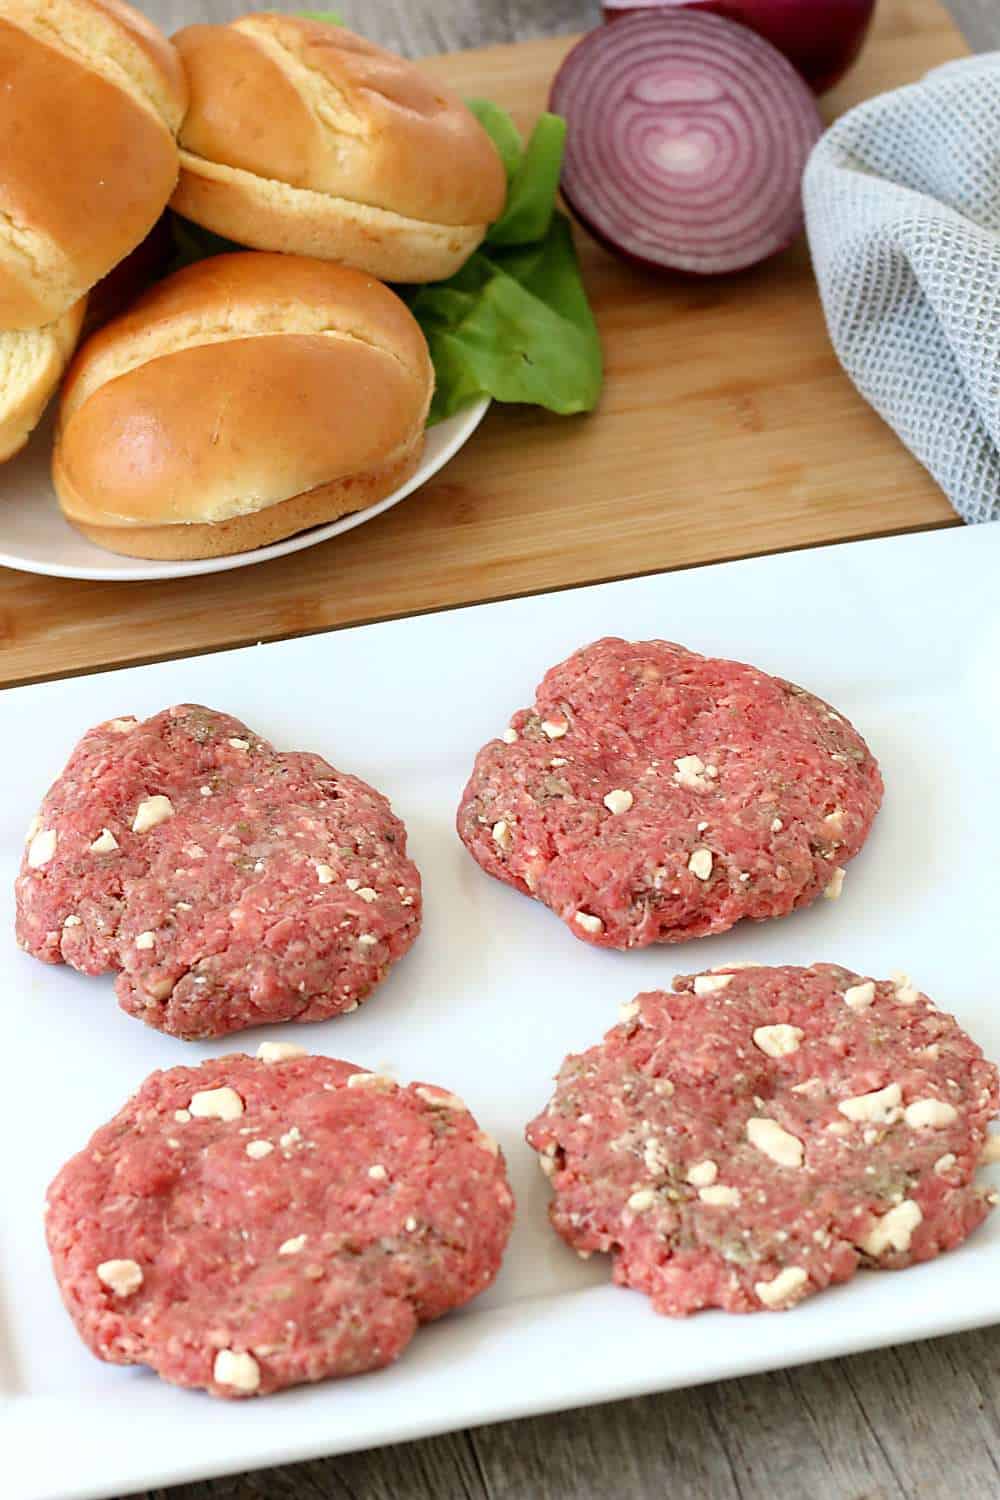 Patties formed for this homemade burger recipe. These feta cheese burgers are ready to be grilled.